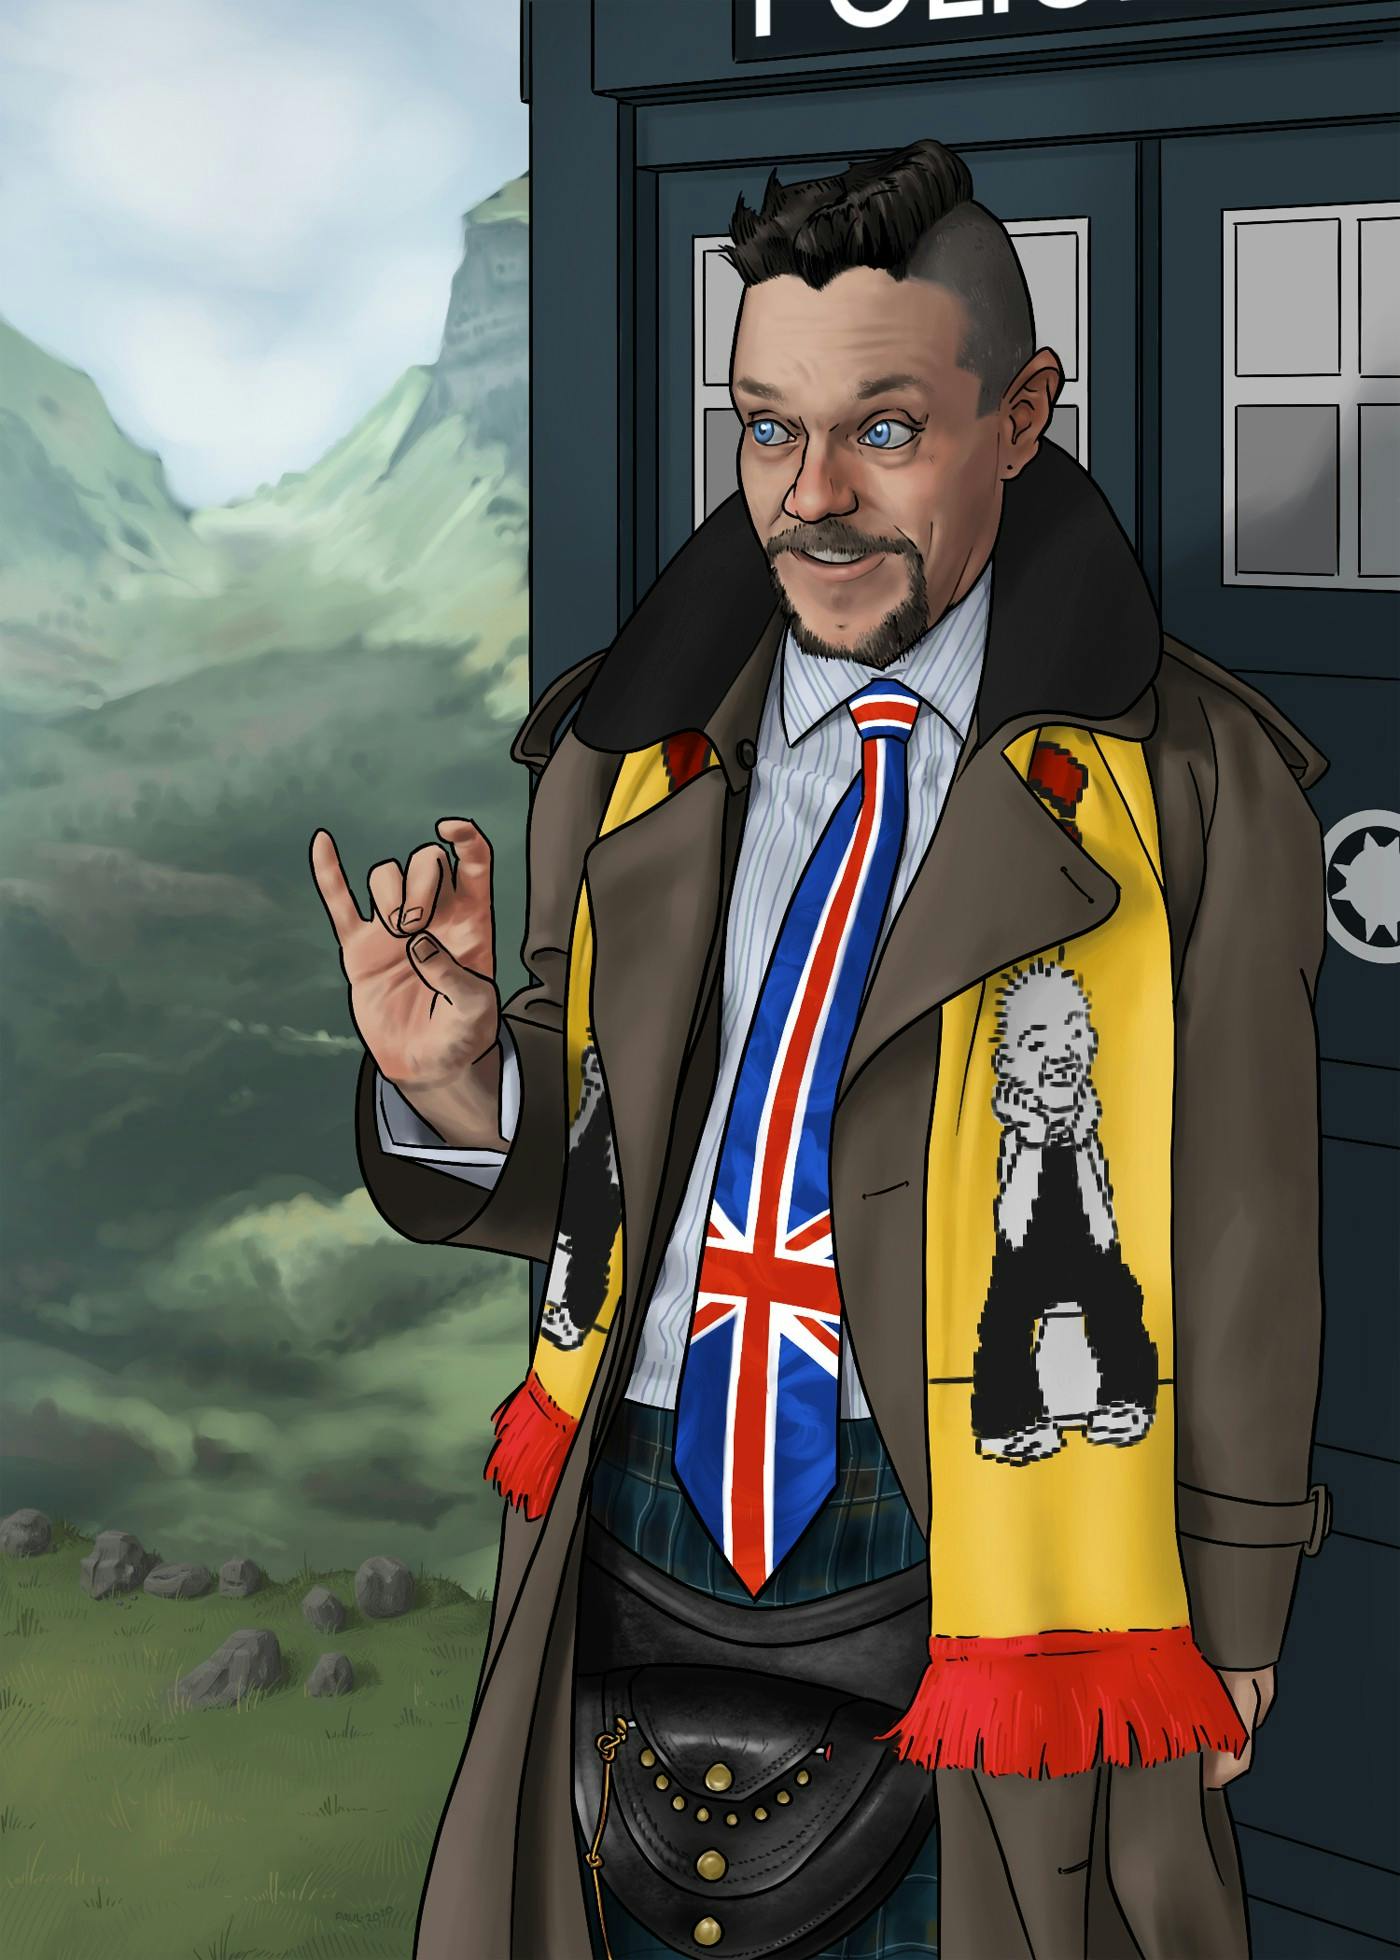 A comic style digital illustration of a man standing next to the Tardis somewhere in the Scottish highlands; he is wearing a long brown trench coat, and Ooo Wille scarf, a union jack tie, and a tartan kilt.